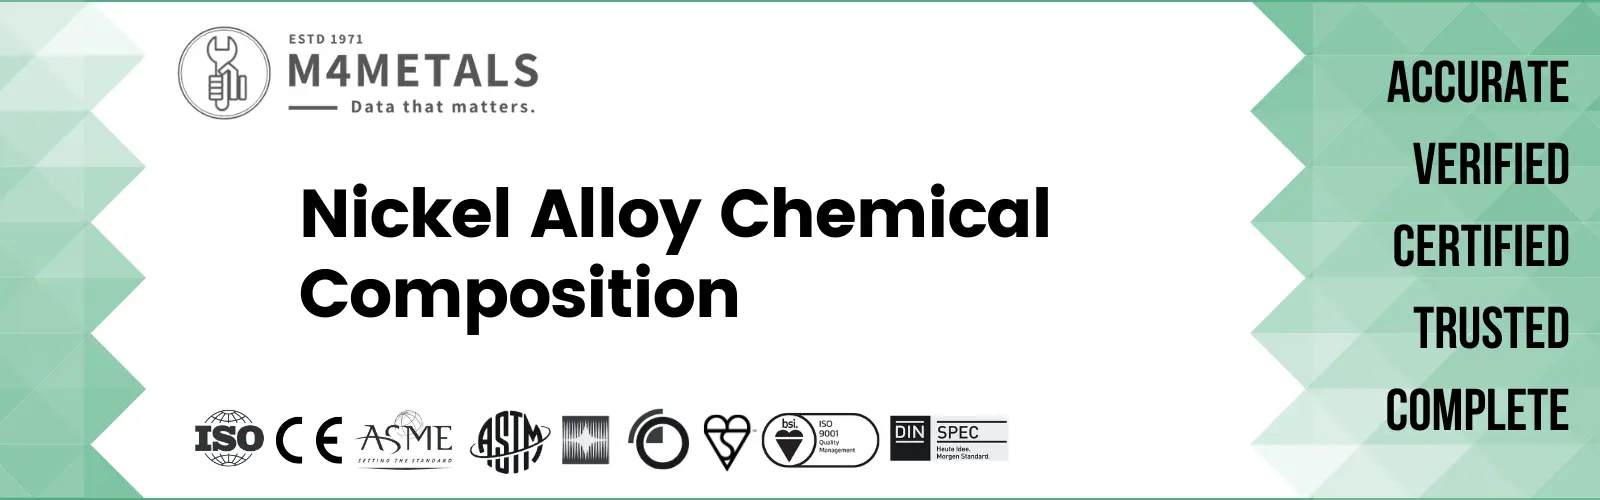 Nickel Alloy Chemical Composition